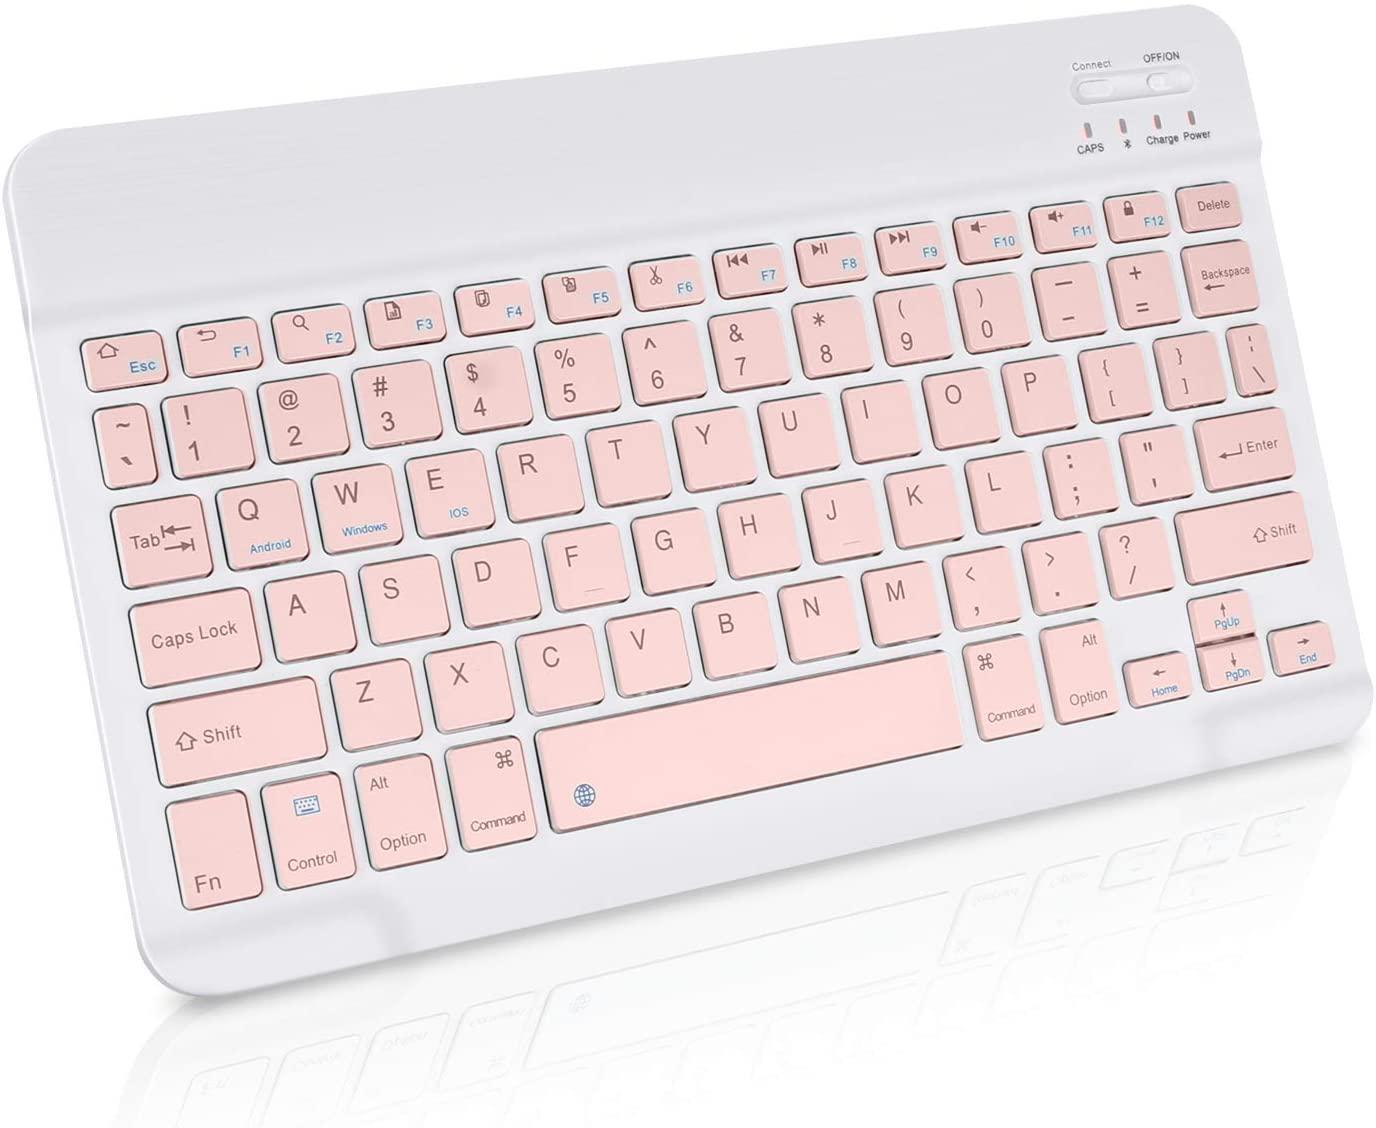 Ultra Slim Portable Wireless Keyboard, 10" Rechargeable Universal Tablet Keyboard for iPad/iPhone, Other iOS Android Windows Tablet PC Phone, Small Wireless Keyboard (Pink)